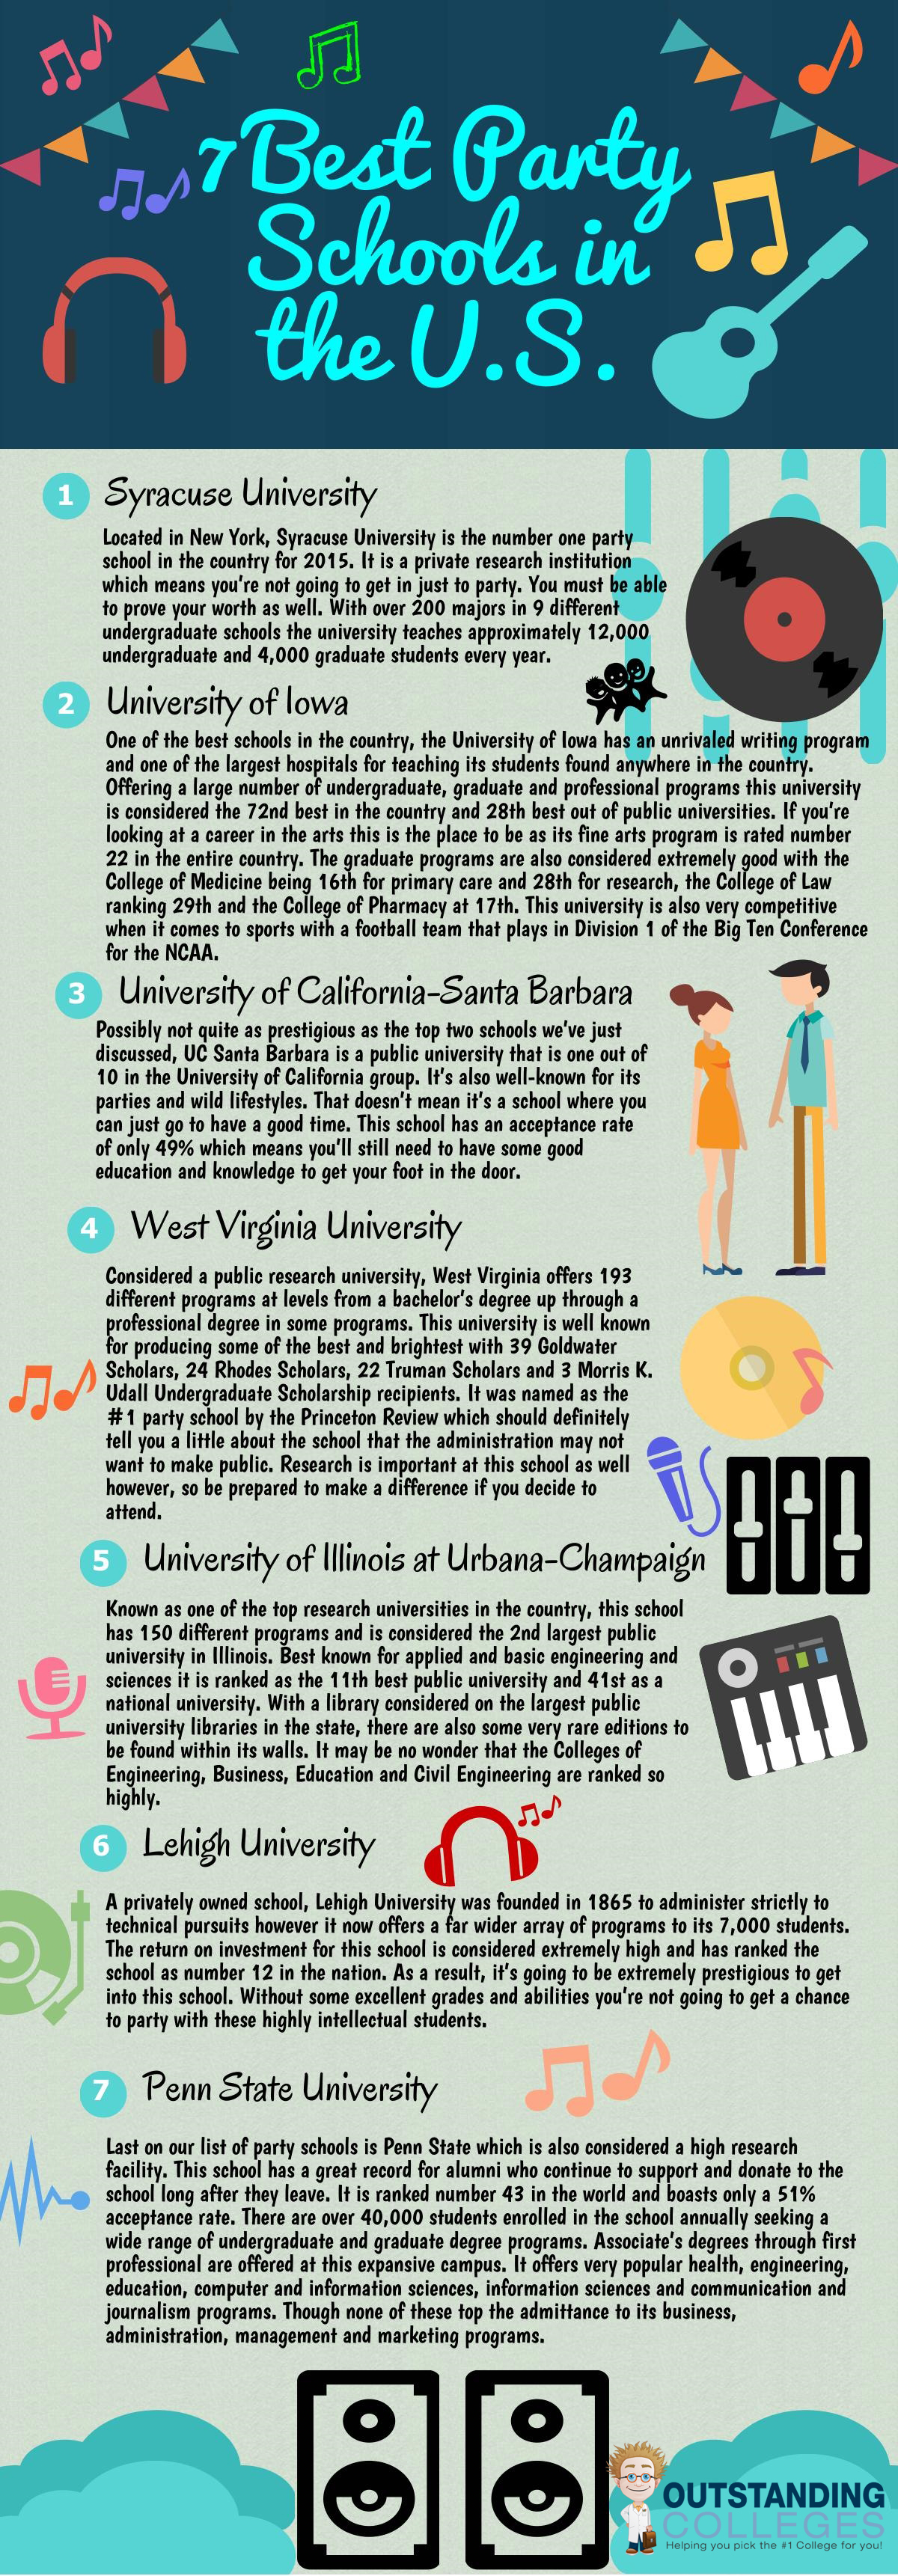 7 best party schools in the U.S. infographic